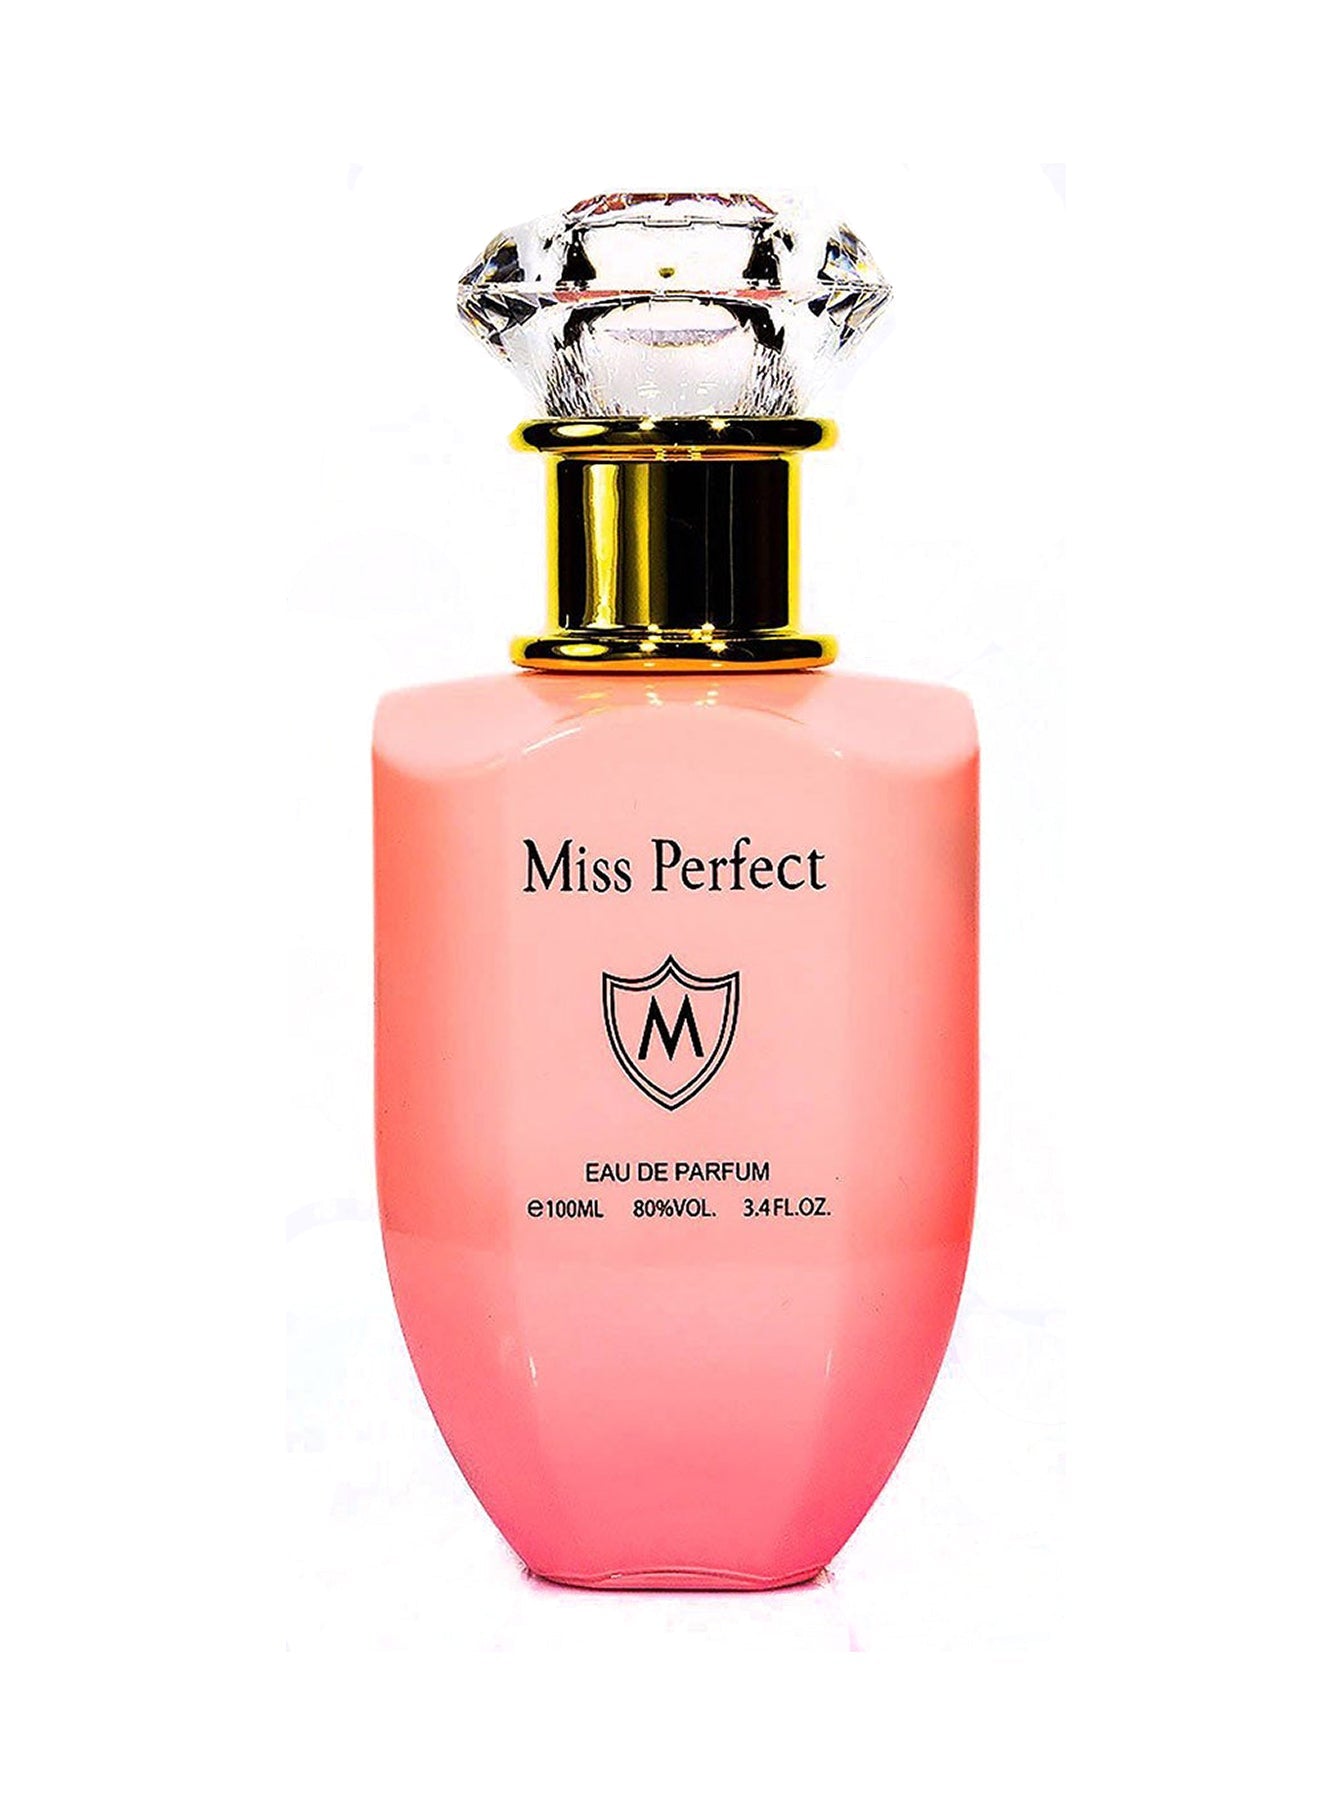 Miss Perfect Eau de Parfum Made in France 100 ml Value Pack of 2